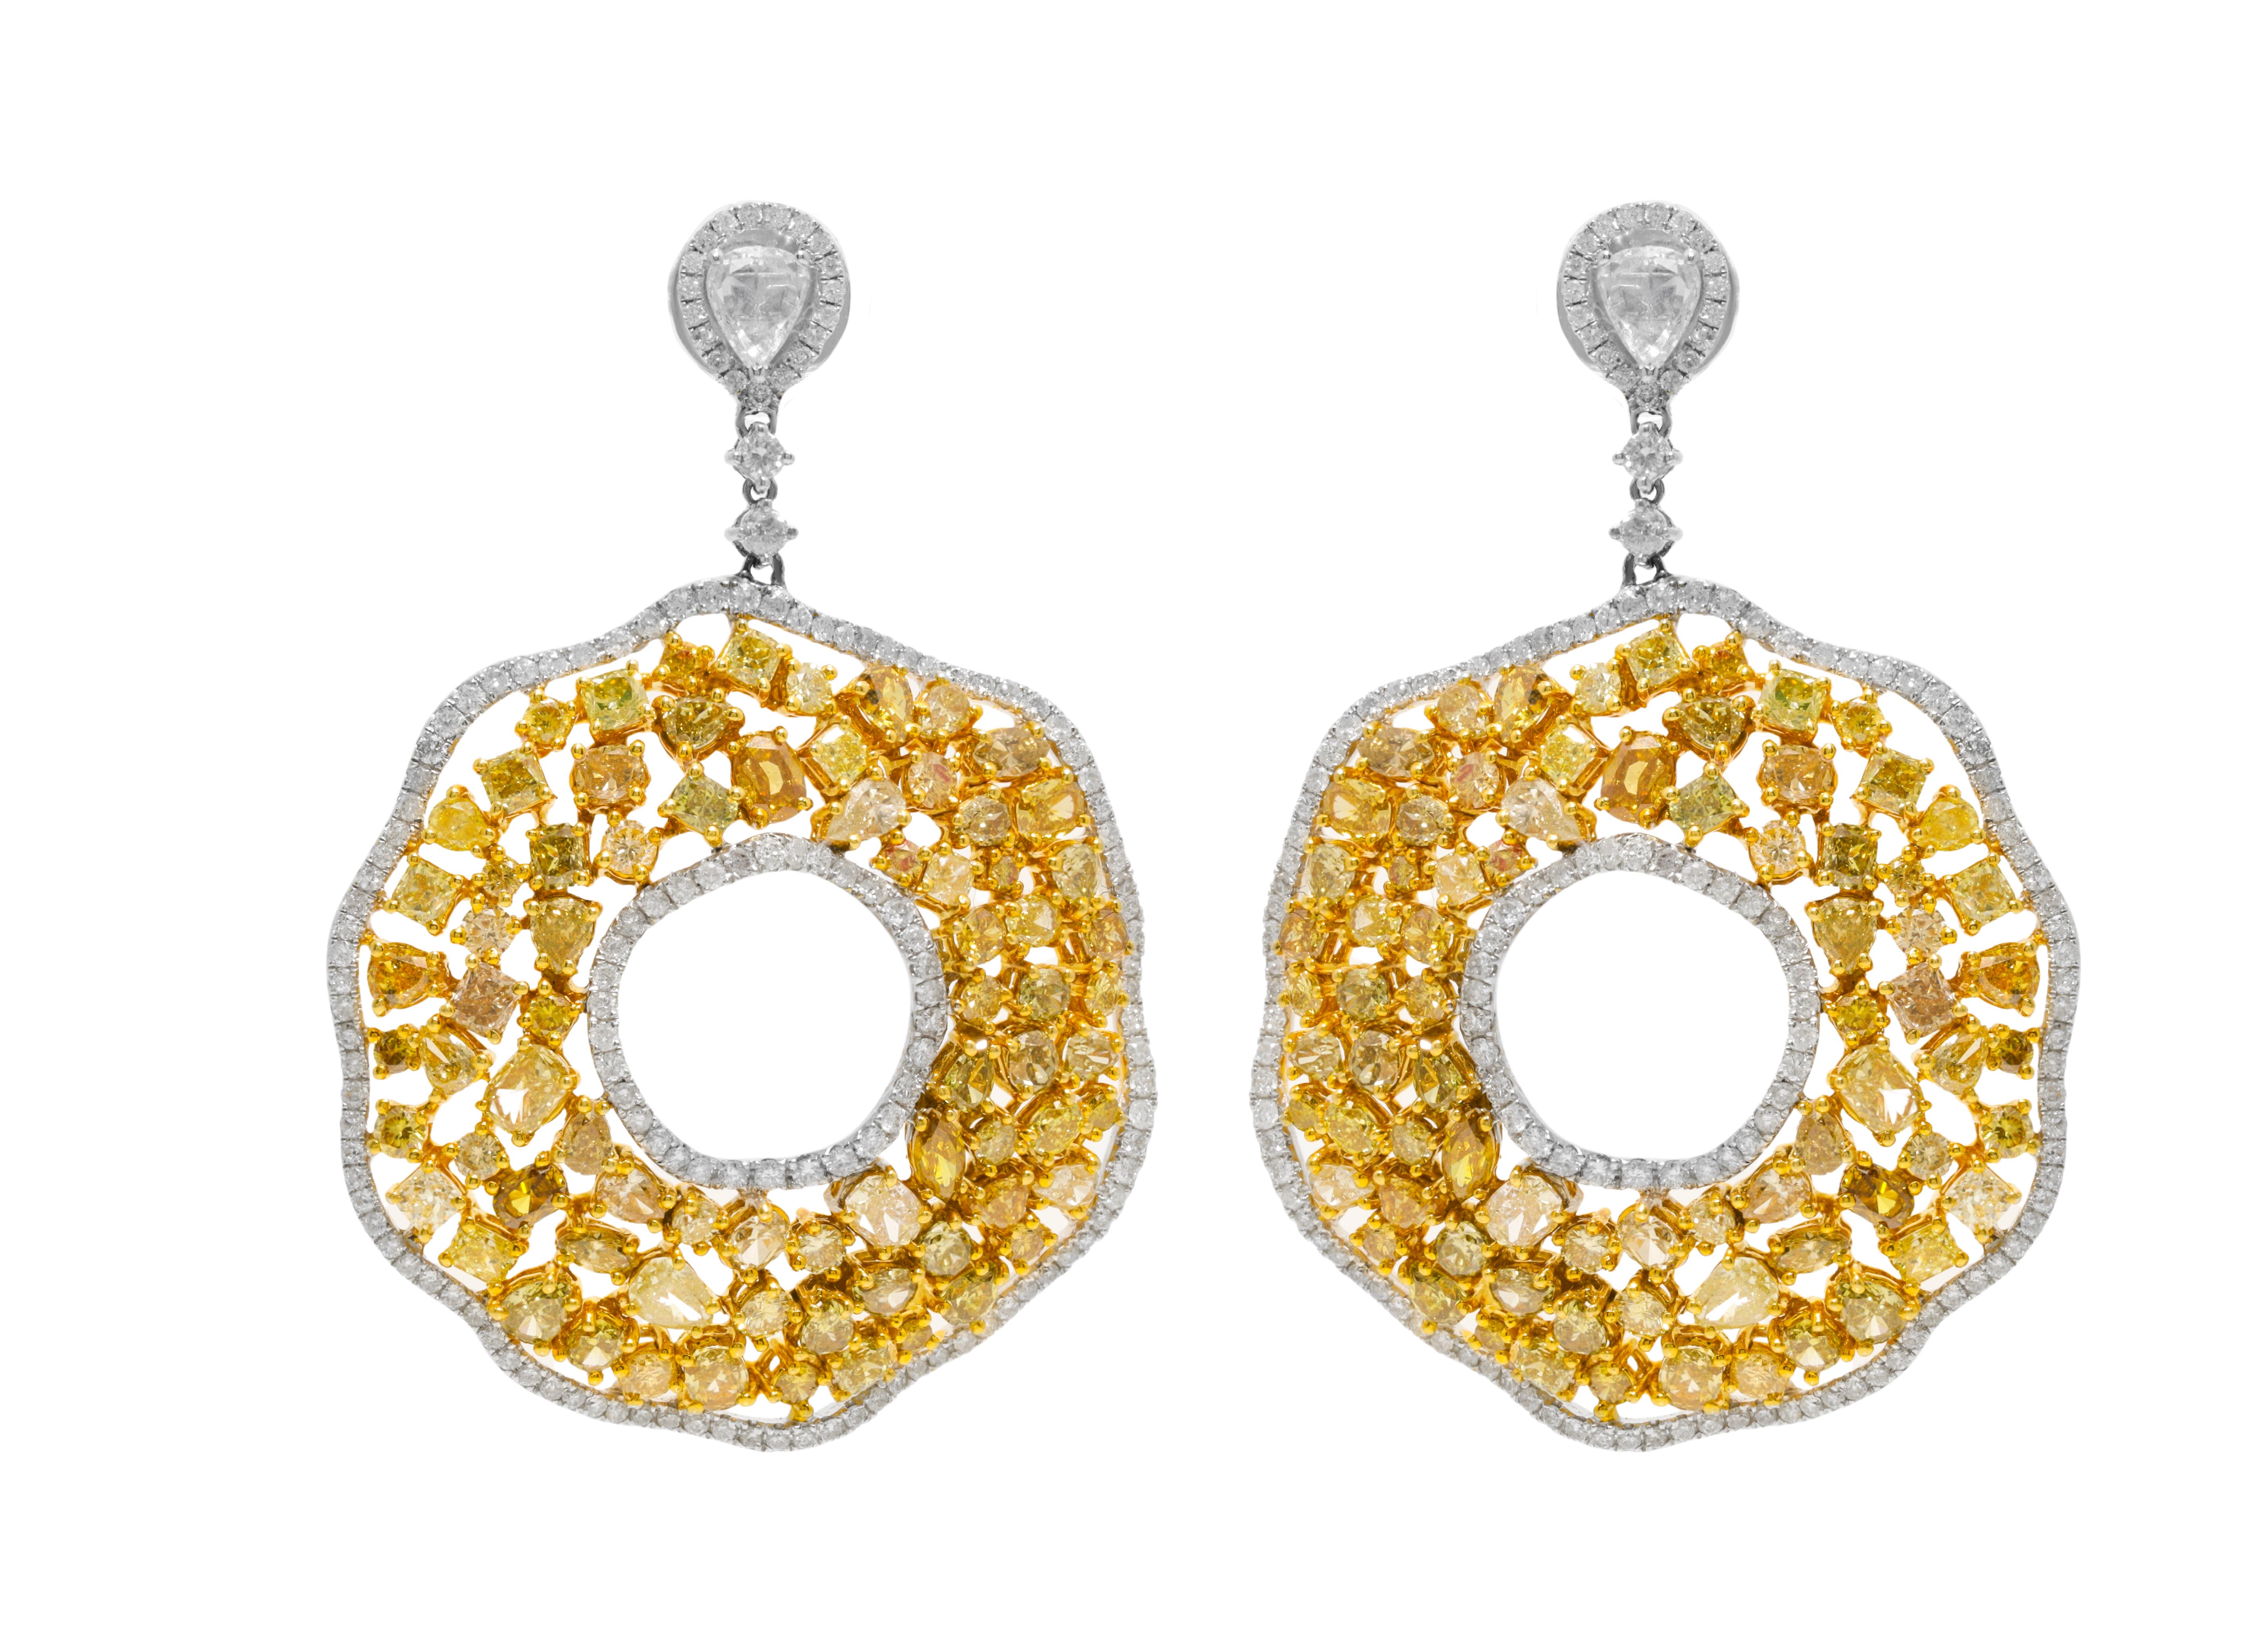  18 kt white gold diamond earrings adorned with 15.44 cts tw of yellow diamonds of various shapes.
Diana M. is a leading supplier of top-quality fine jewelry for over 35 years.
Diana M is one-stop shop for all your jewelry shopping, carrying line of